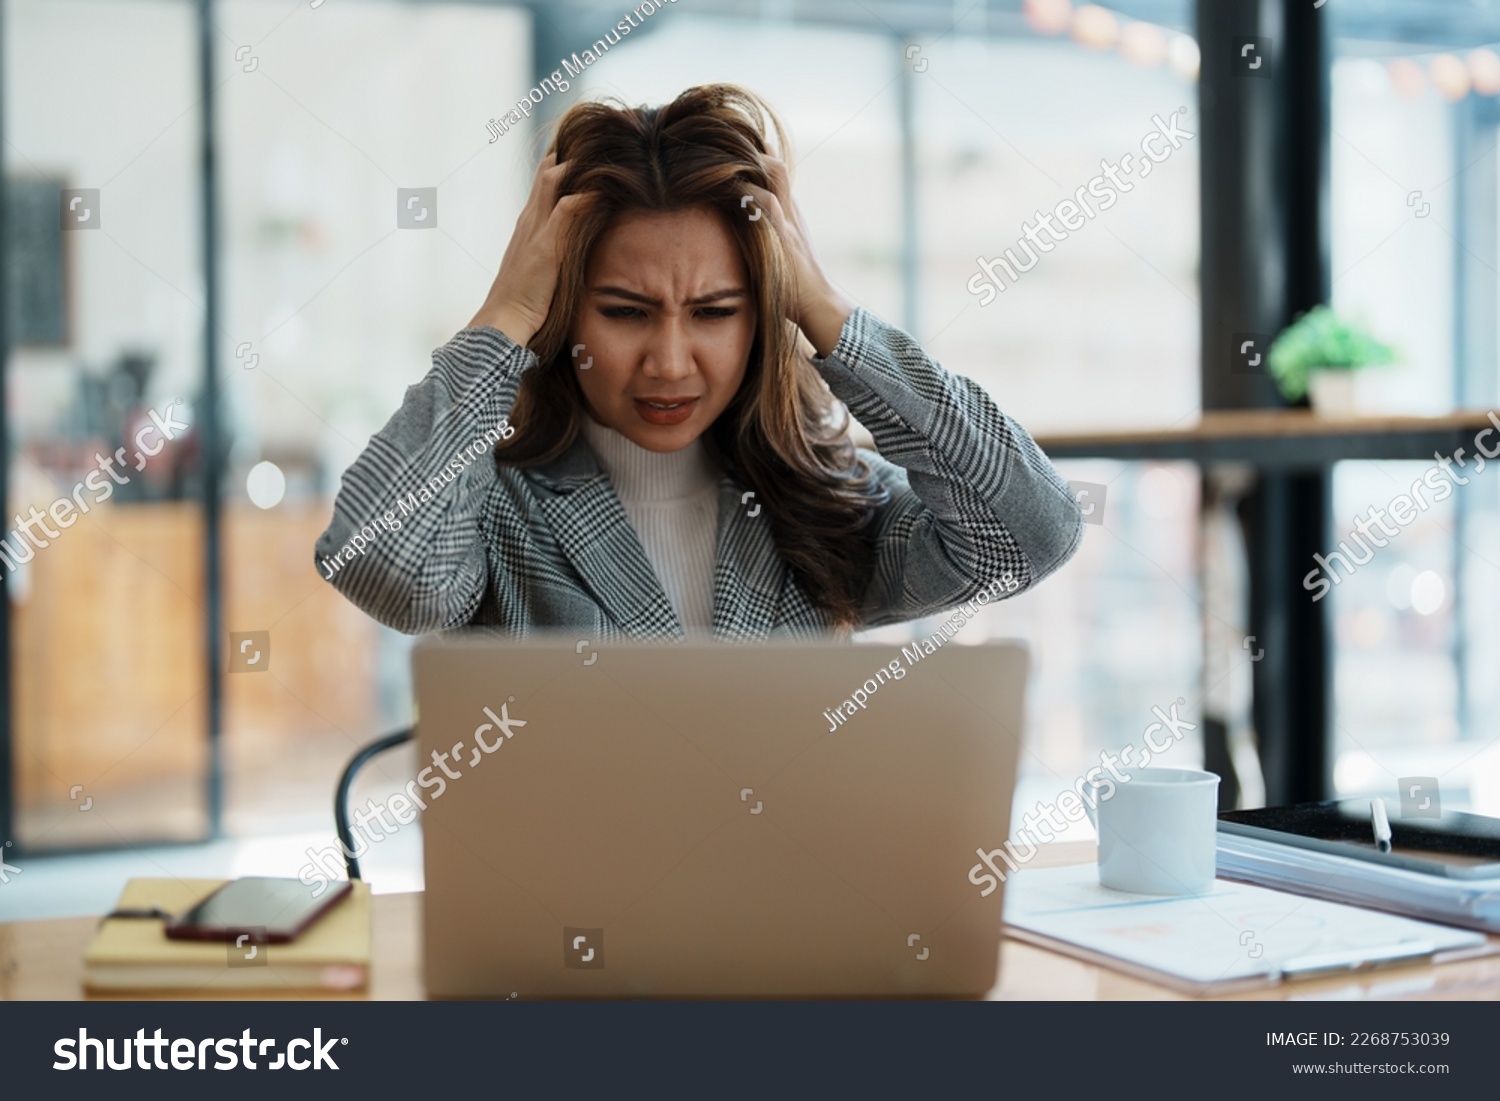 Portrait of business owner, woman using computer and financial statements Anxious expression on expanding the market to increase the ability to invest in business. #2268753039